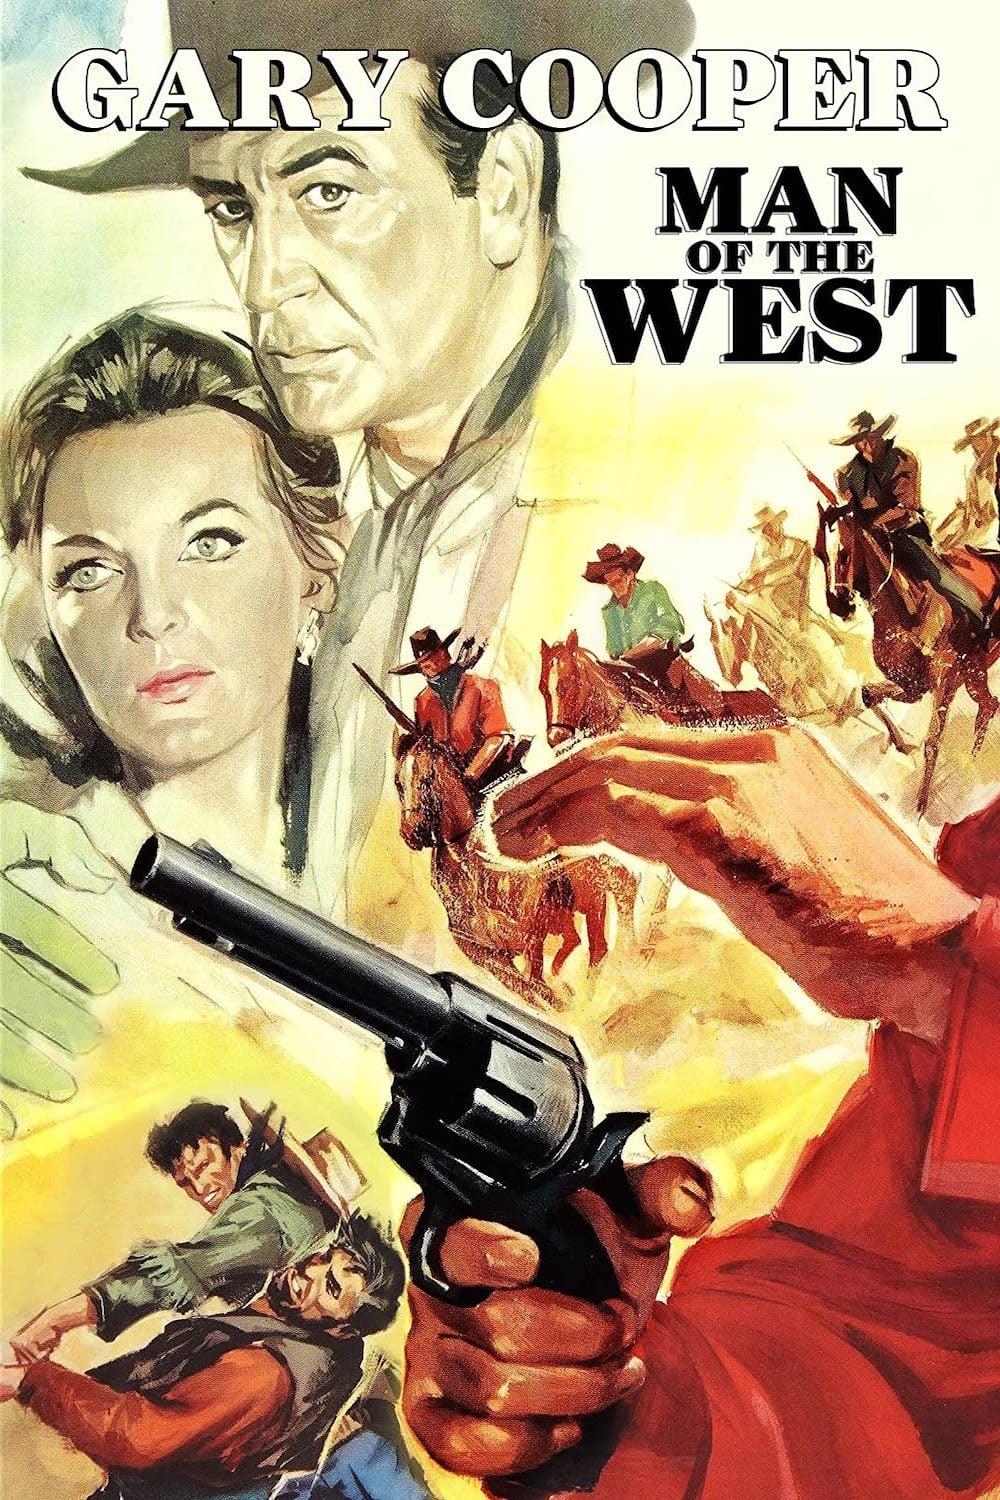 Man of the West poster